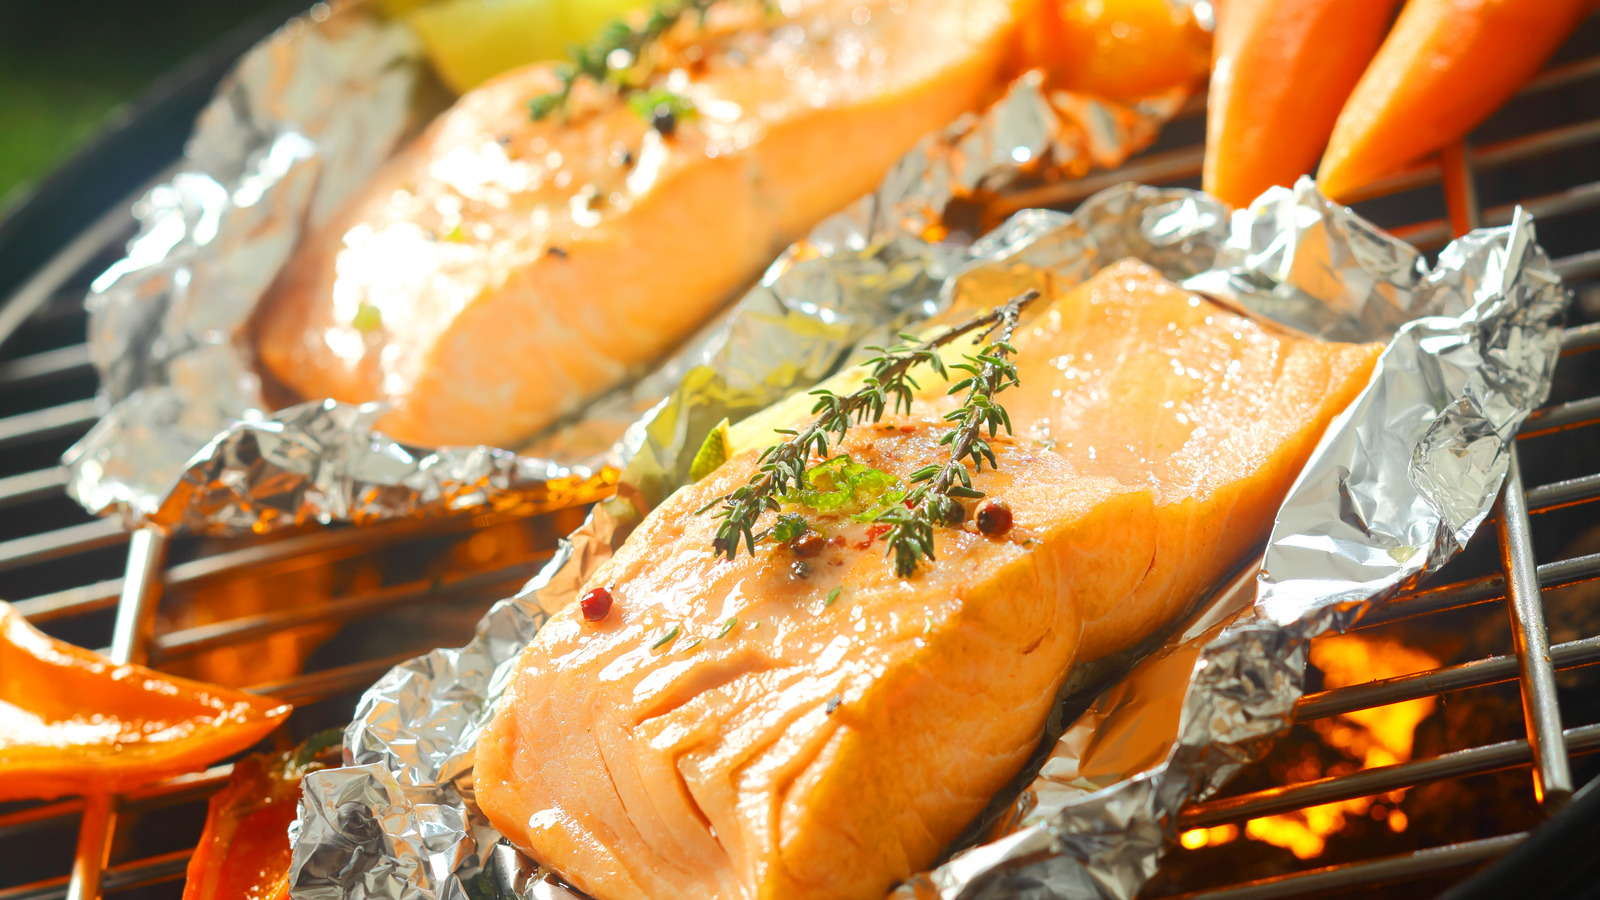 What You Should Use Instead Of Aluminum Foil For Your Grill